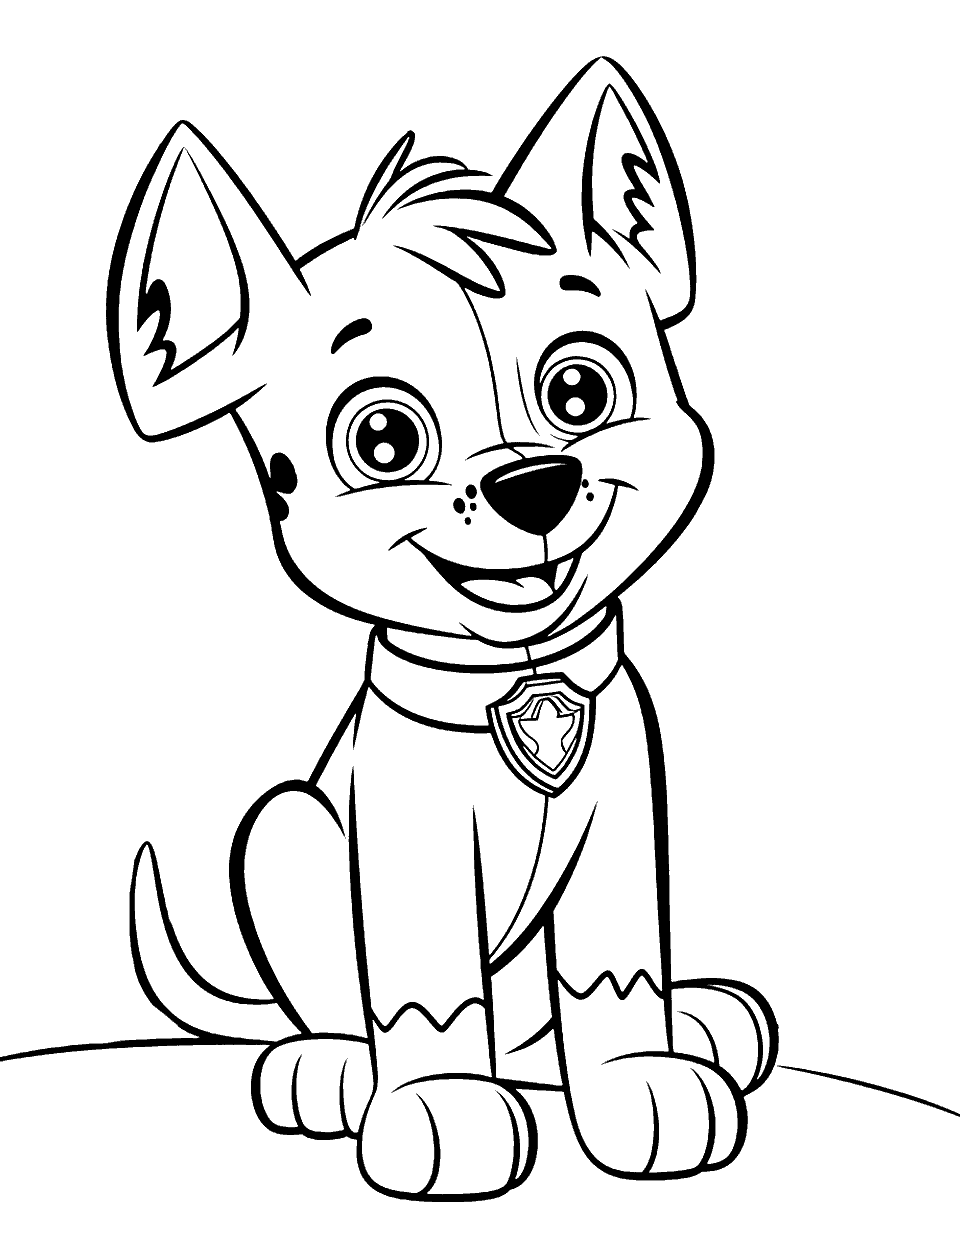 Paw Patrol Coloring Page - Chase from Paw Patrol with a big smile on his face.